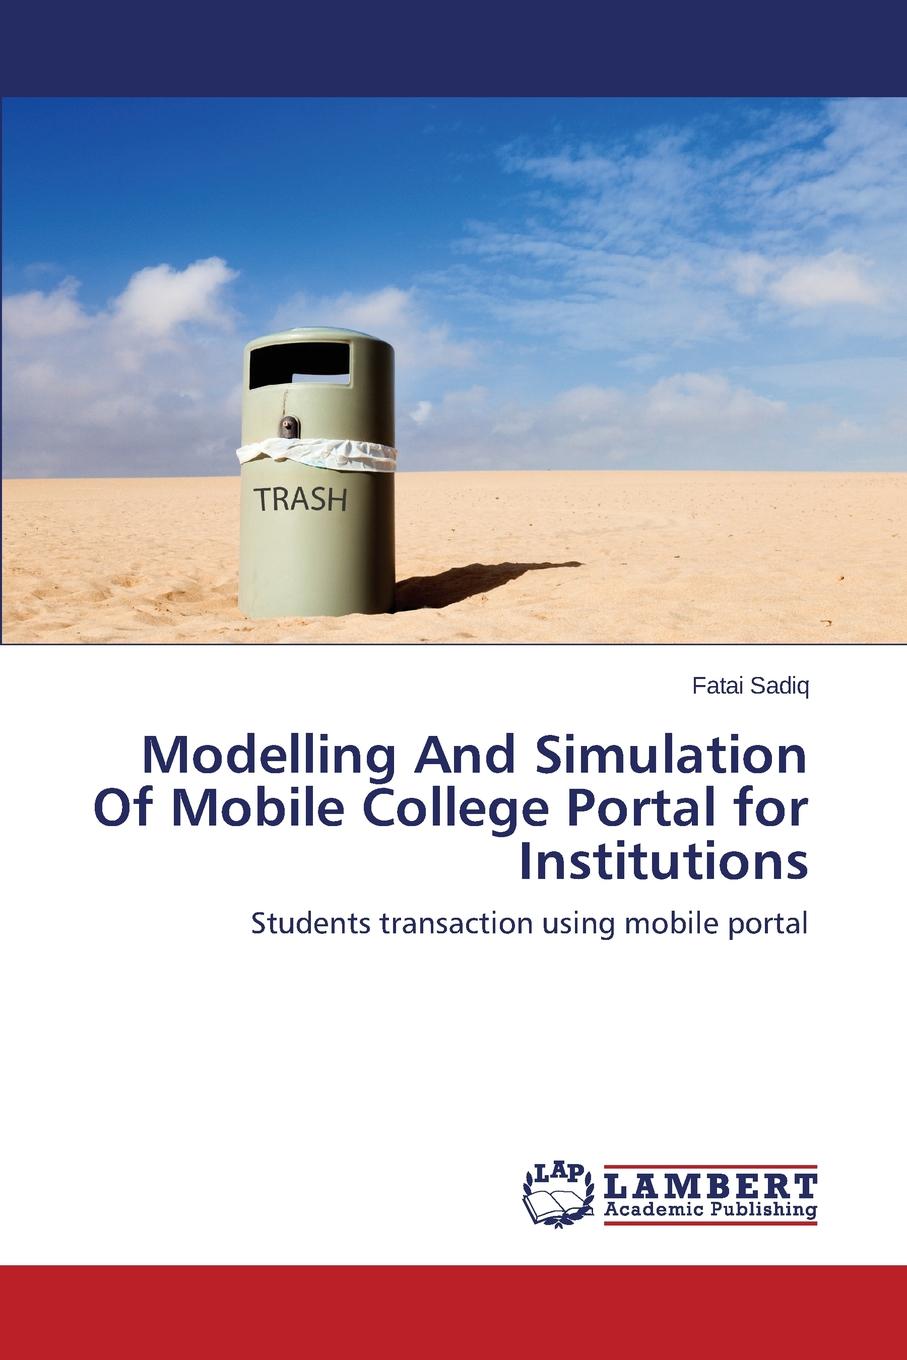 Modelling and Simulation of Mobile College Portal for Institutions